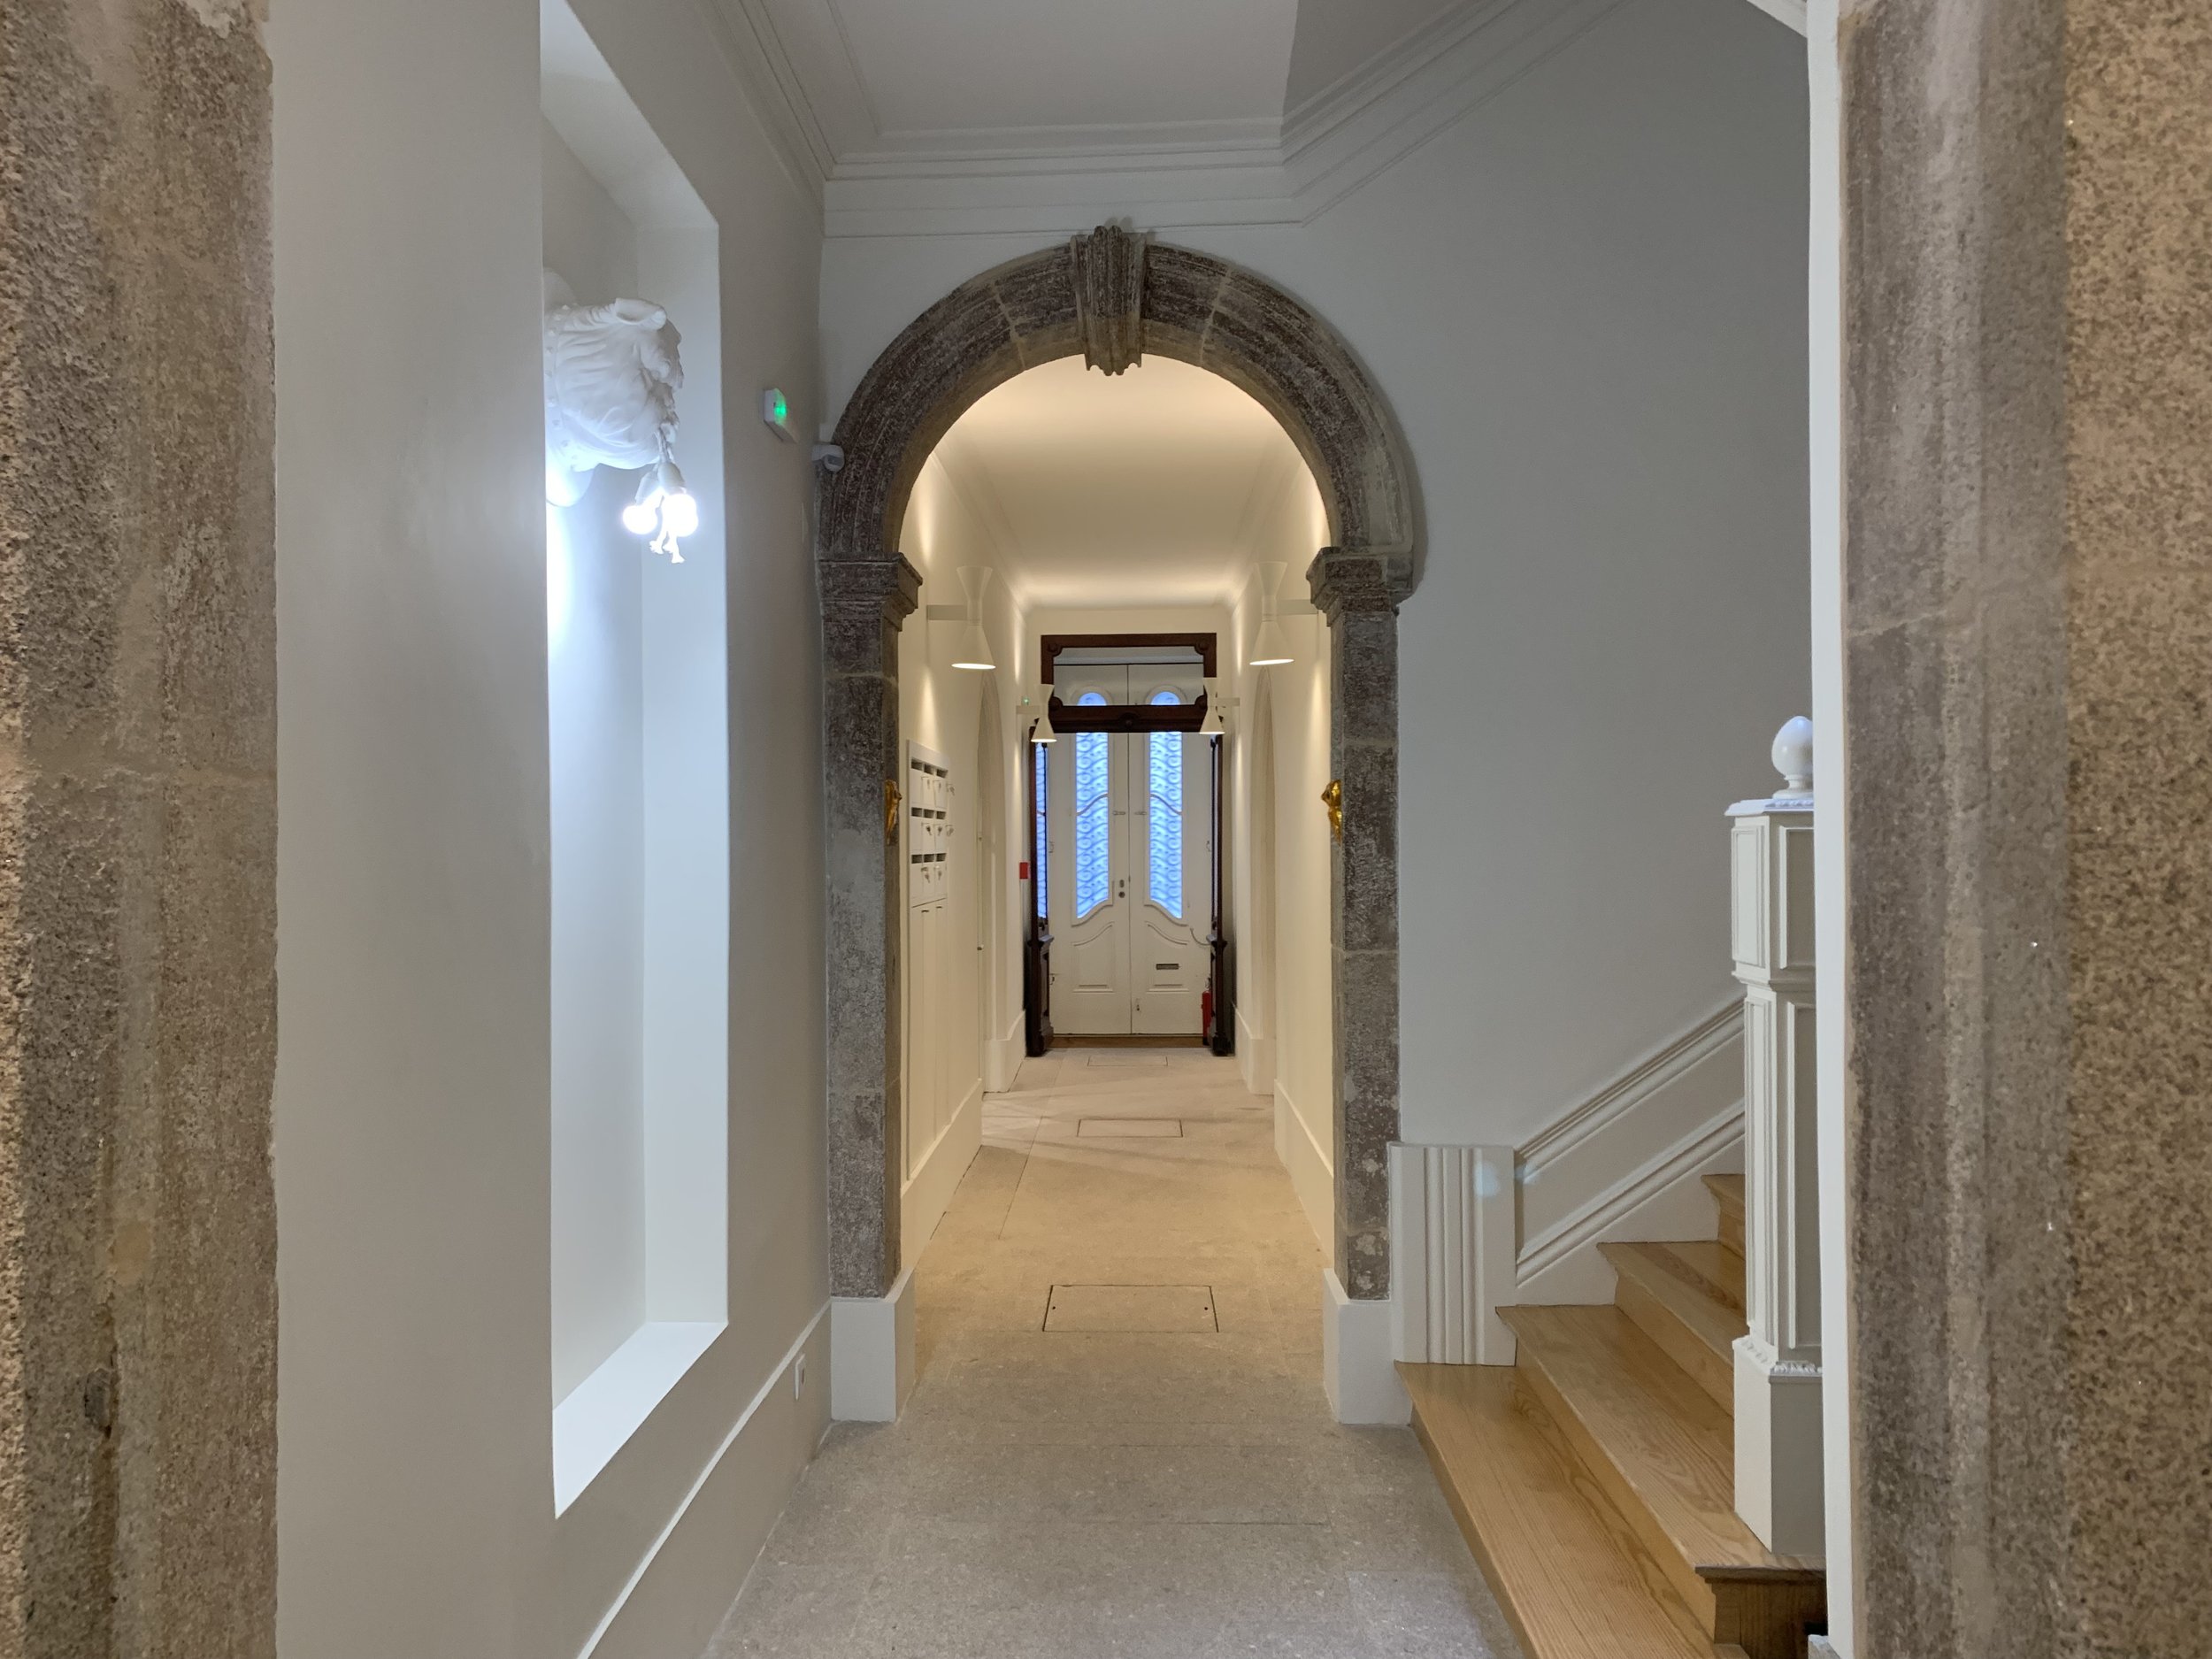 Entry hallway  and main entry doors